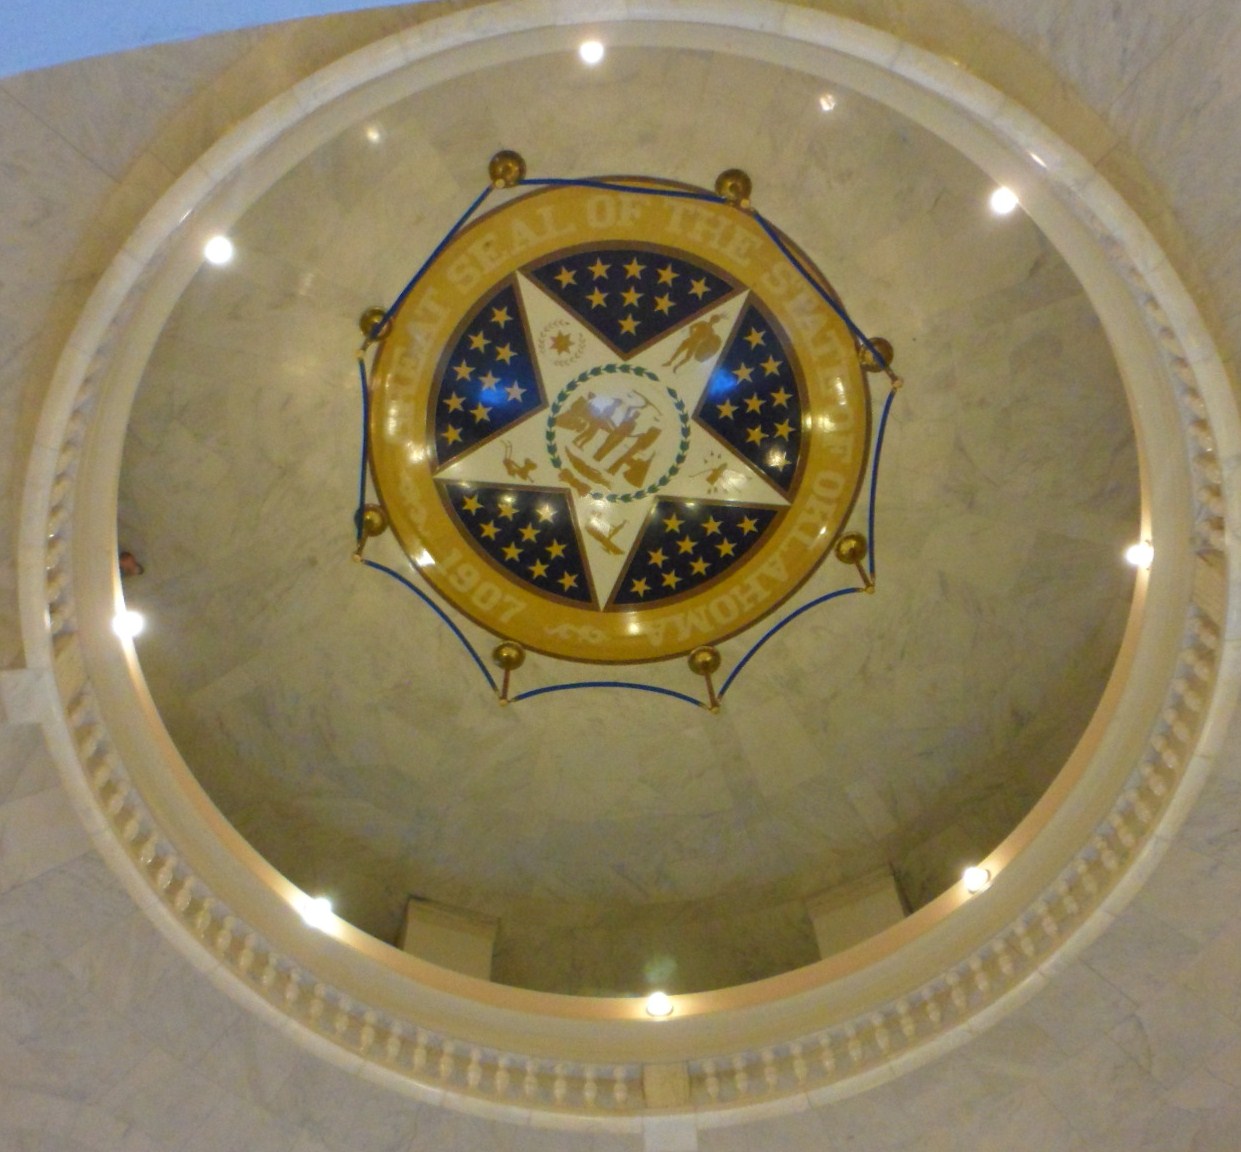 The Great Seal of the State of Oklahoma